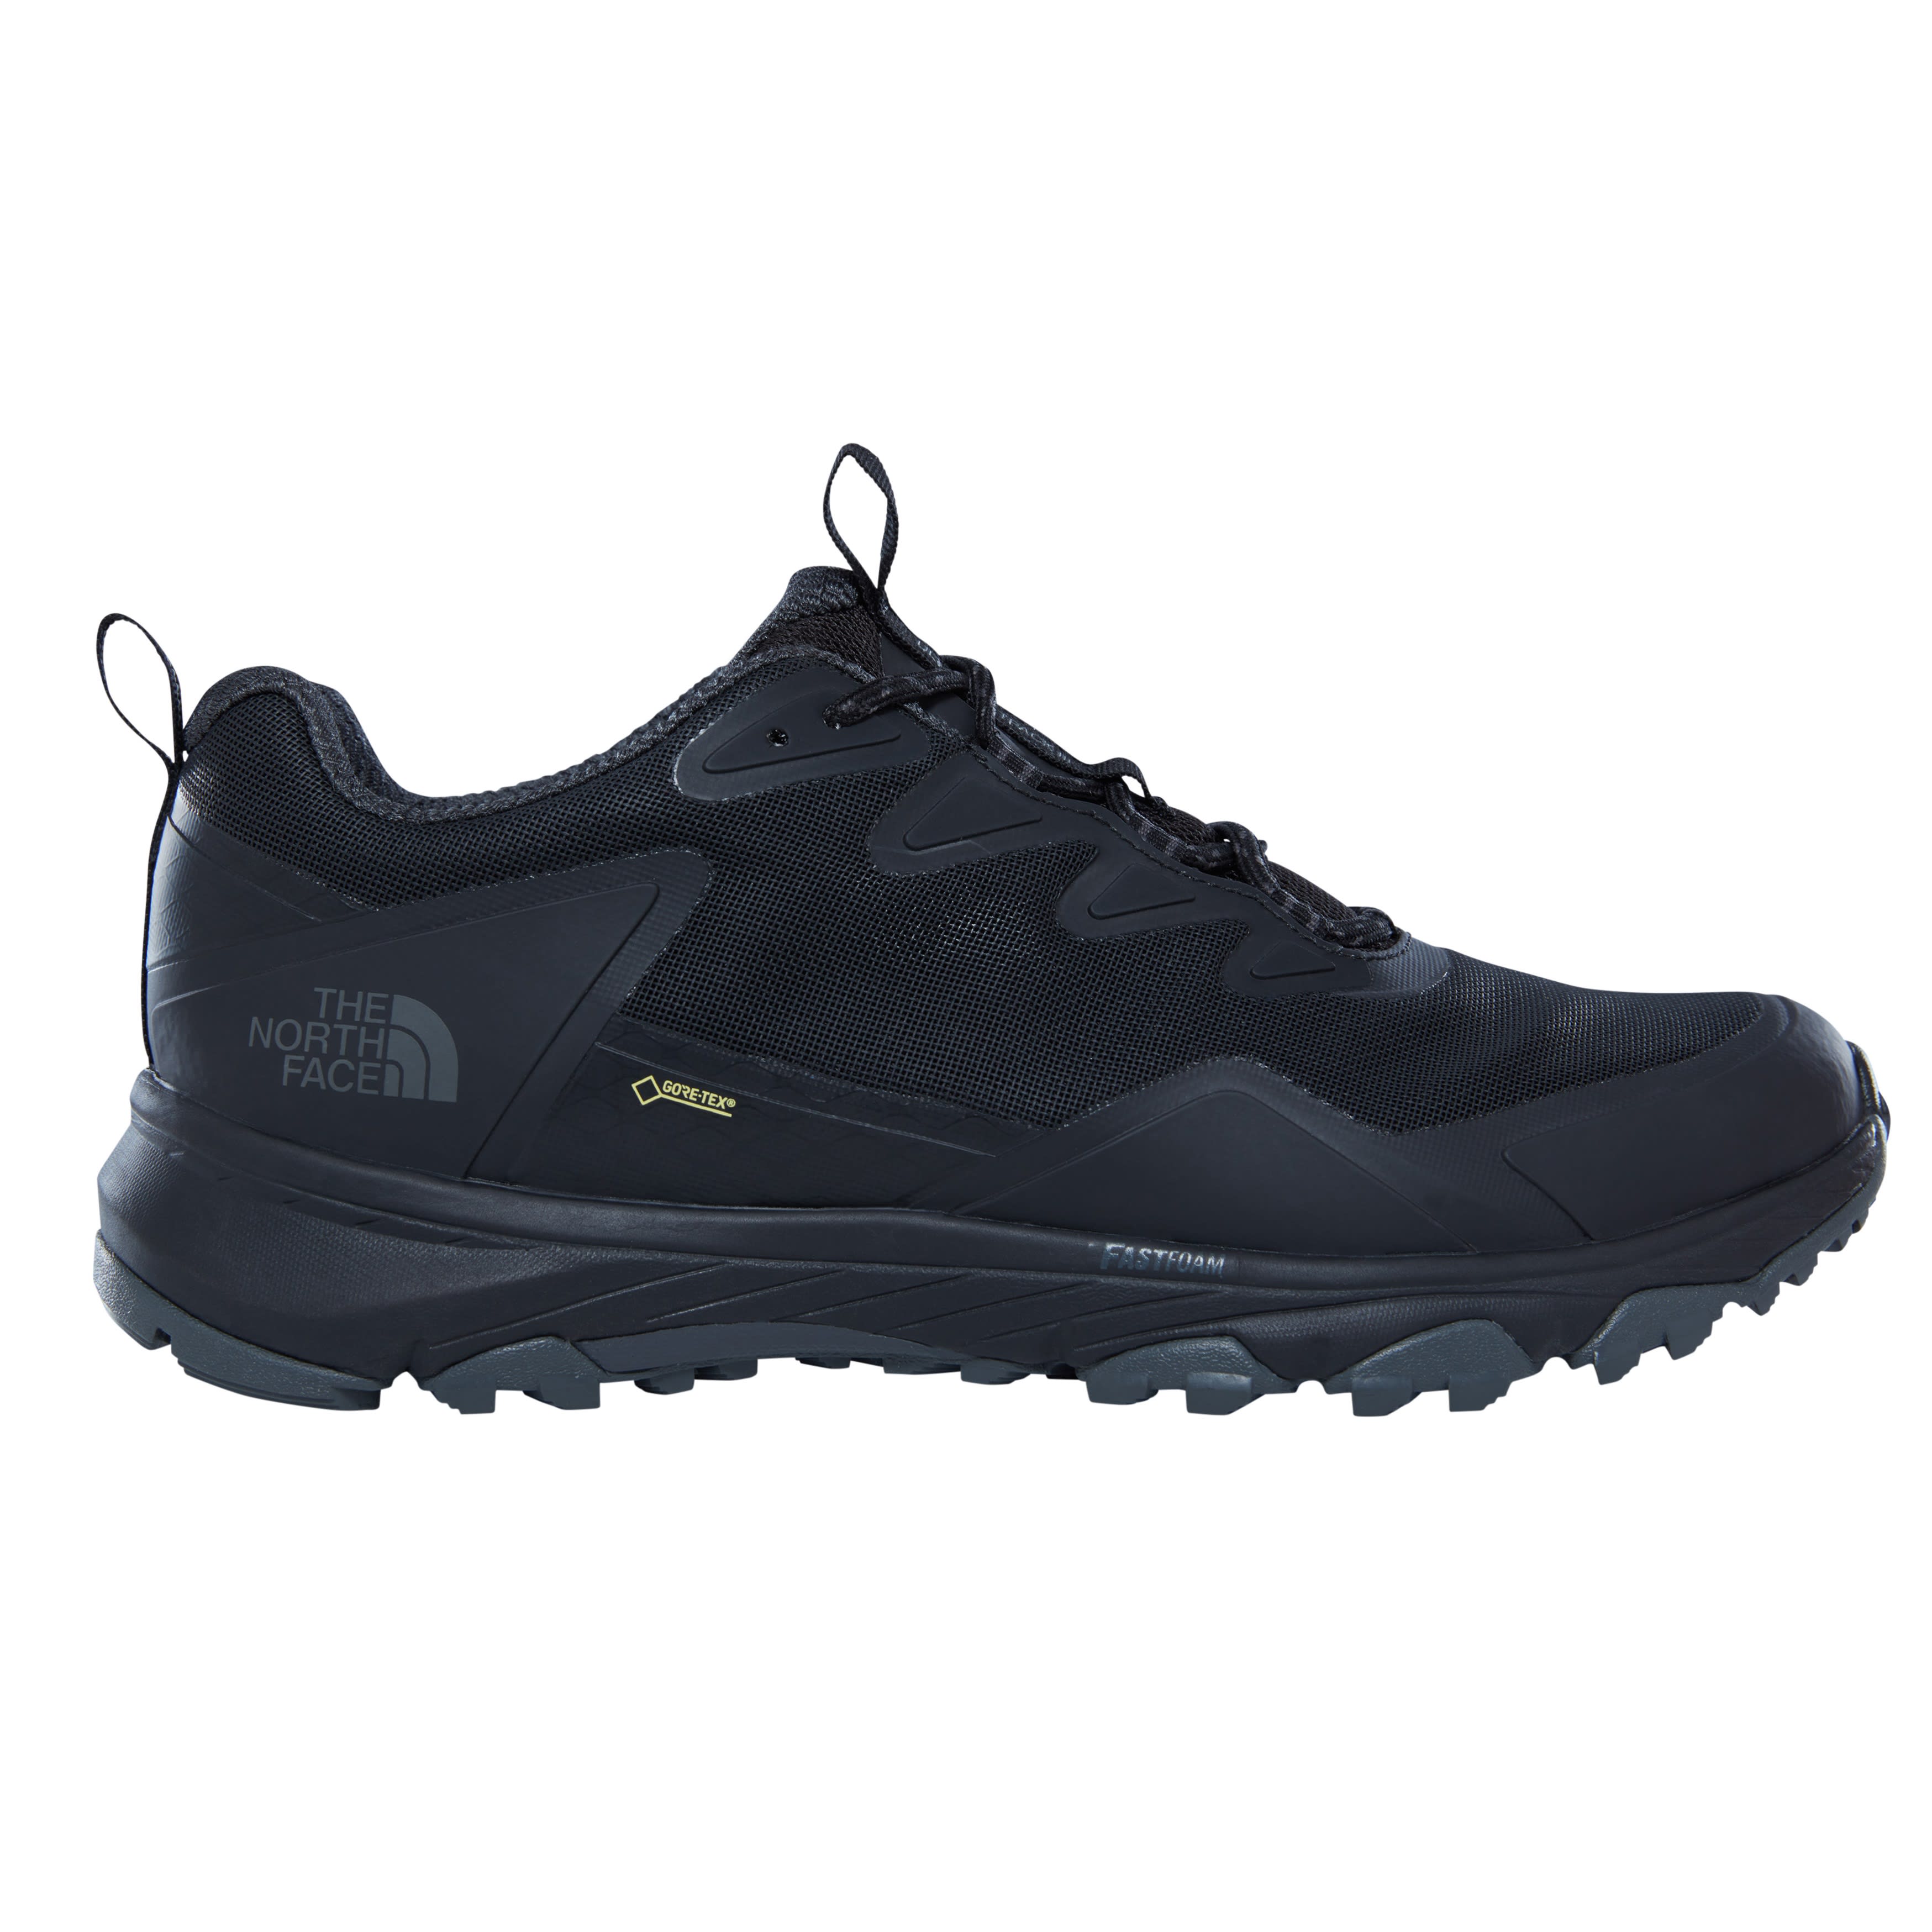 Reizen Beweren Wizard Buy The North Face Men's Ultra Fastpack III Gore-Tex from Outnorth